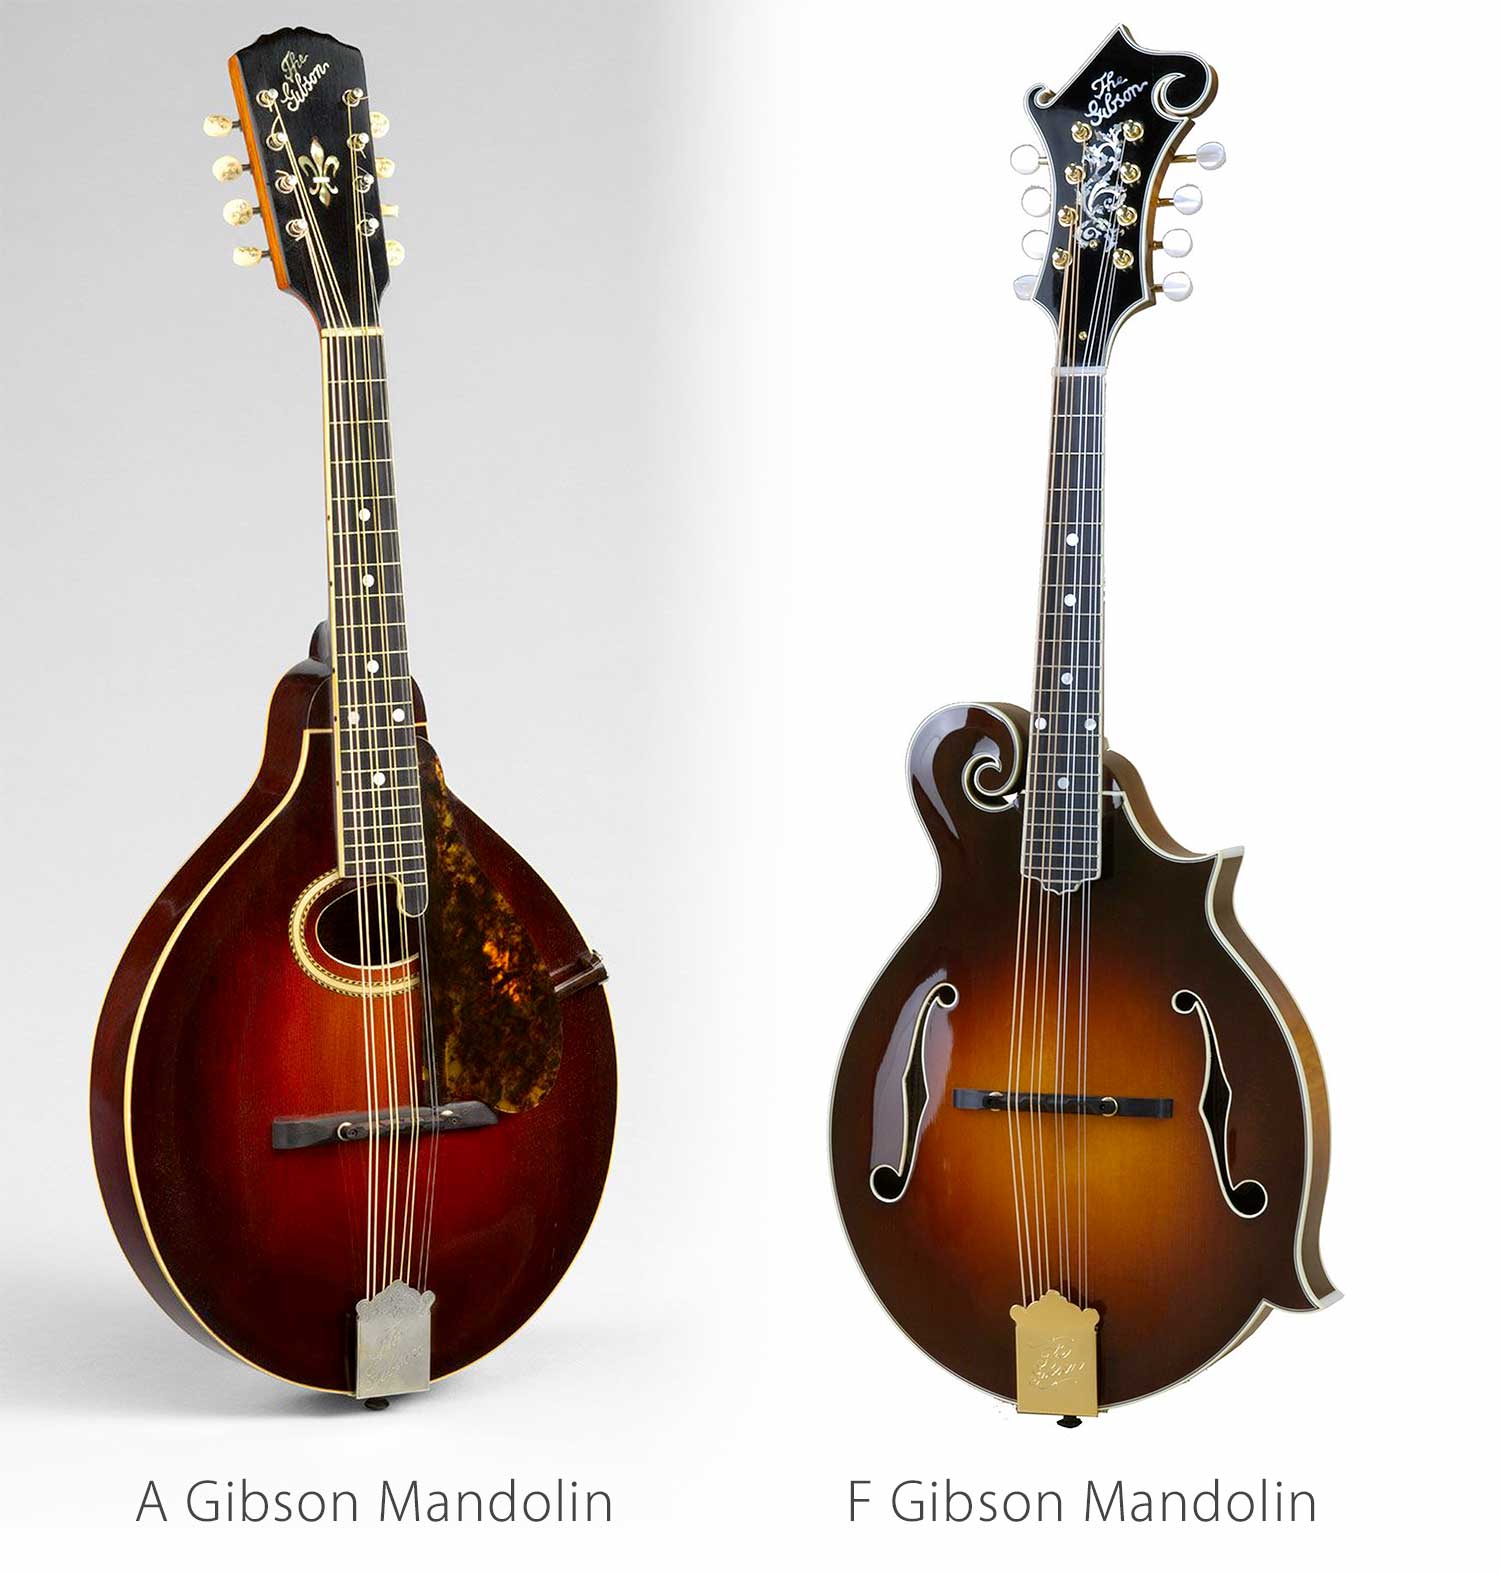 When is the best time to buy a gibson mandolin?